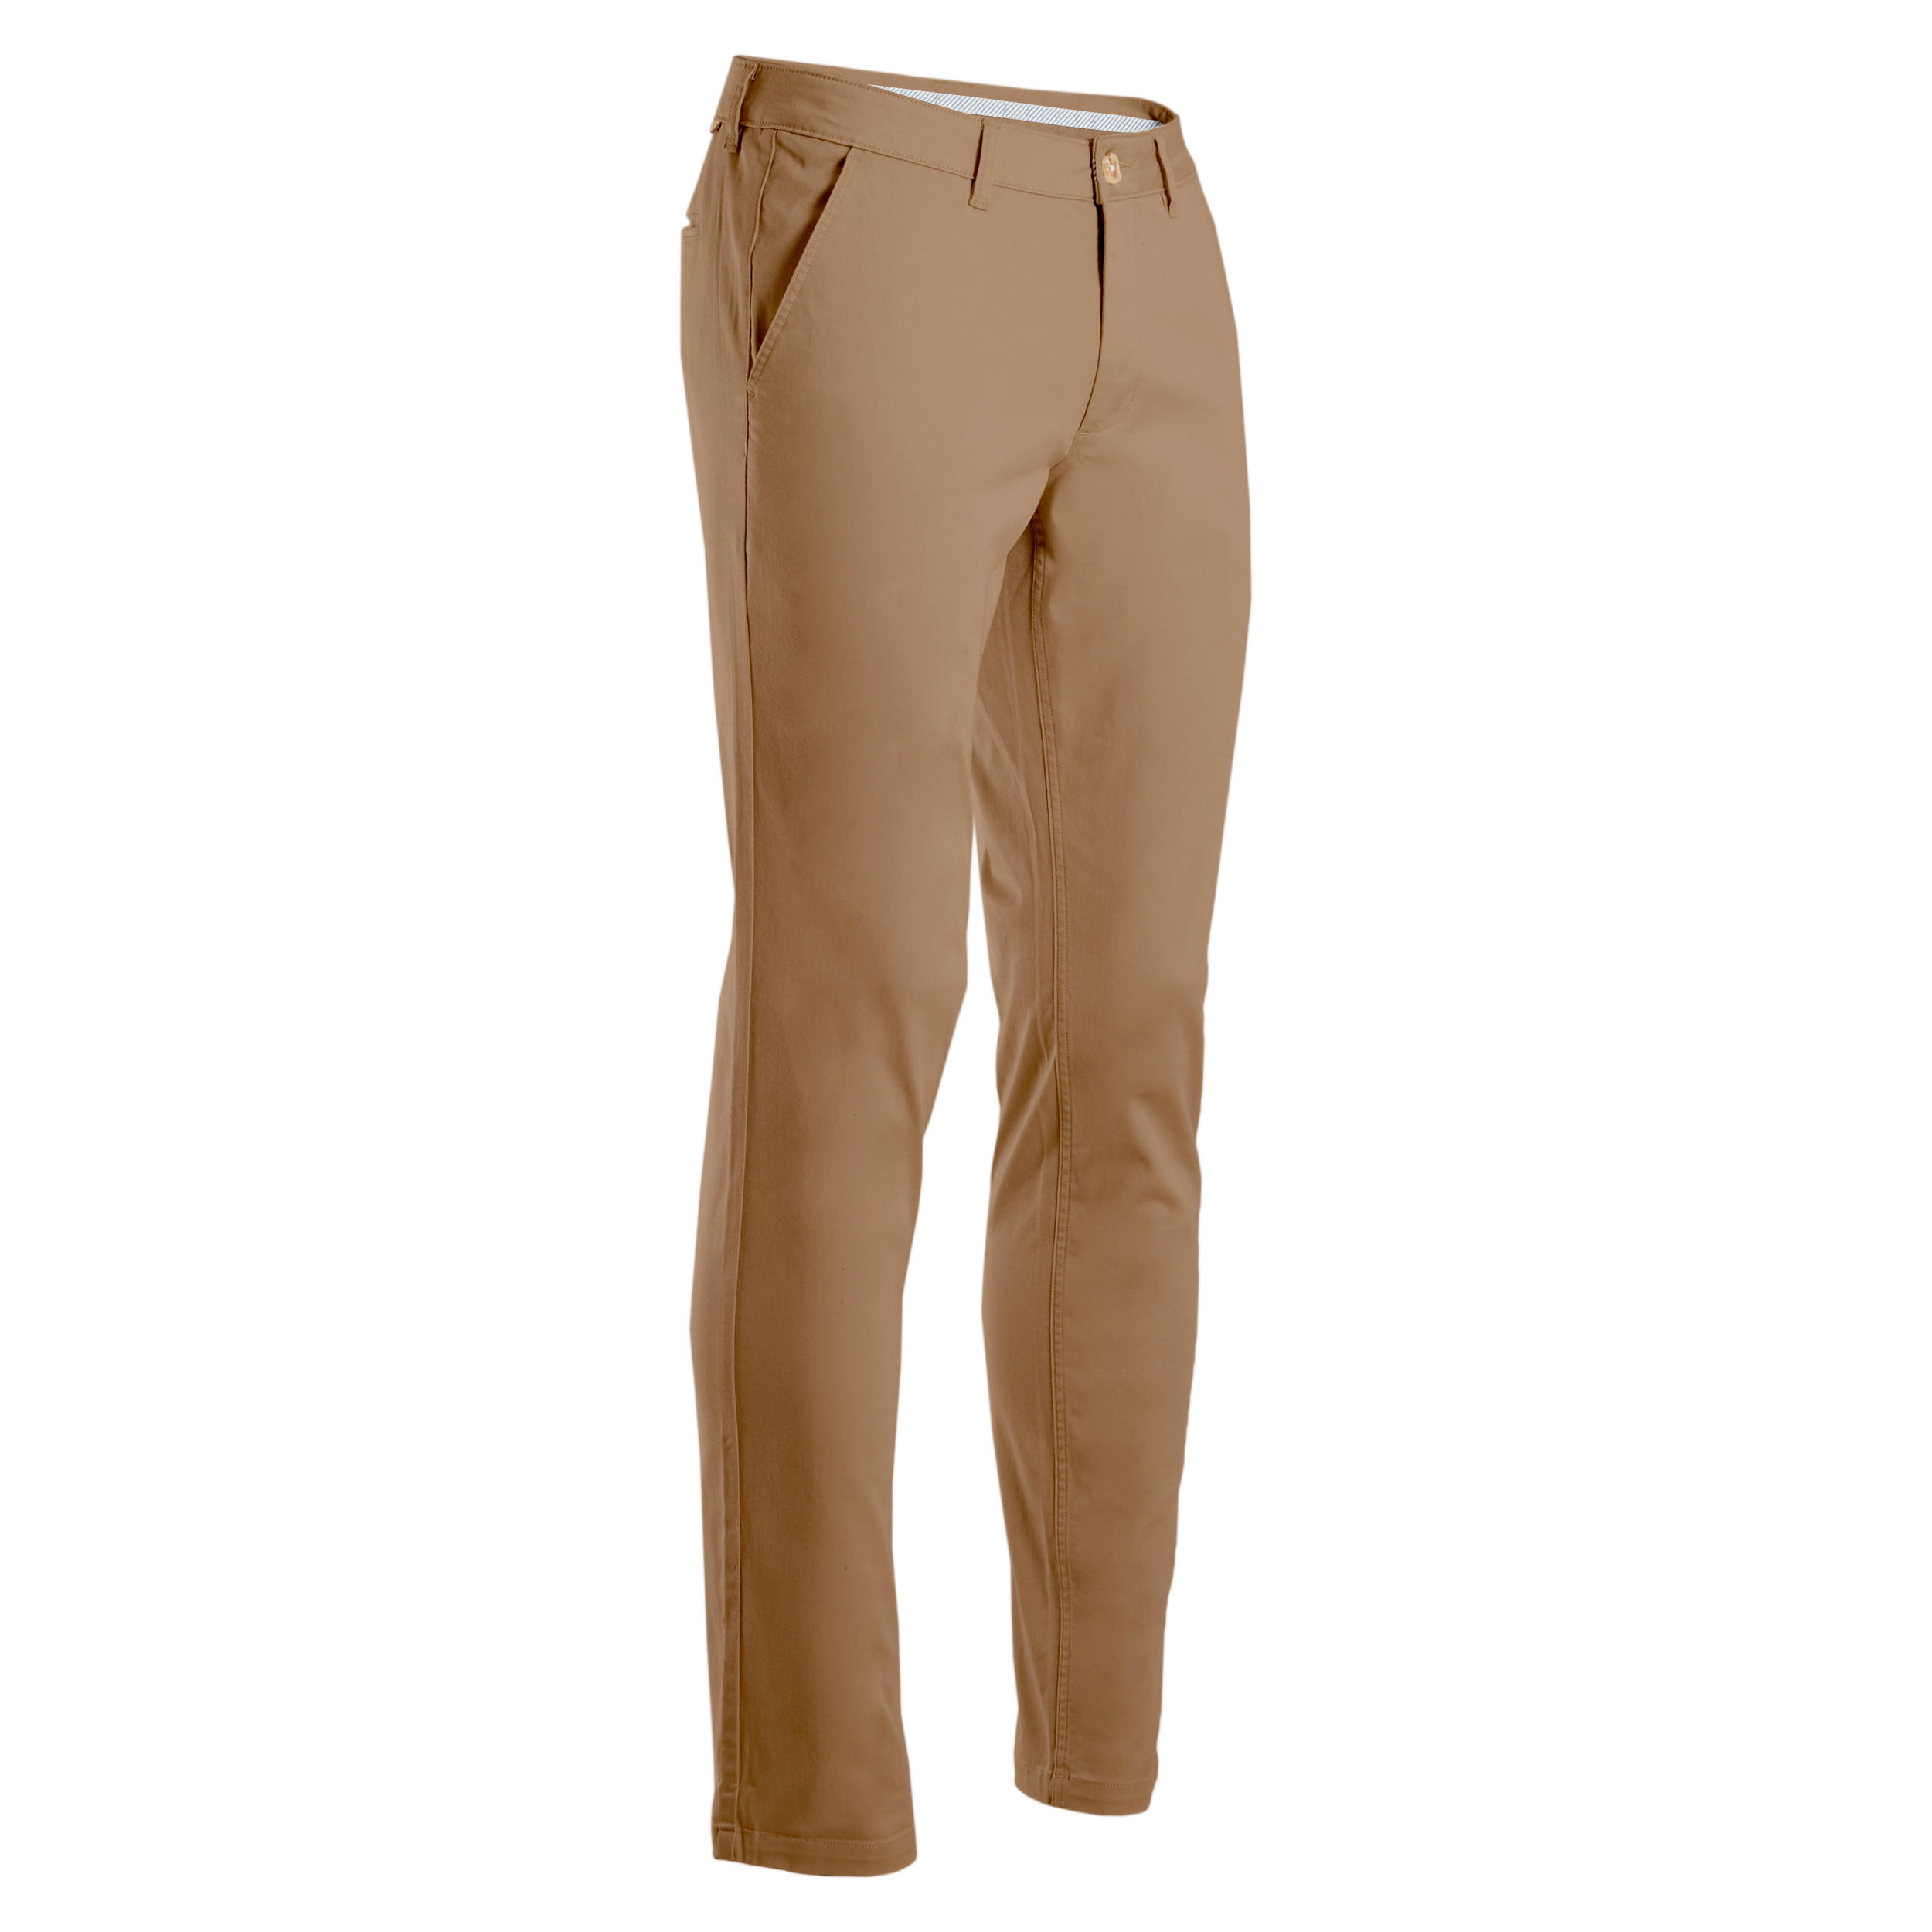 Decathlon Men Golf Trousers WW500 Grey Mens Fashion Bottoms Trousers  on Carousell